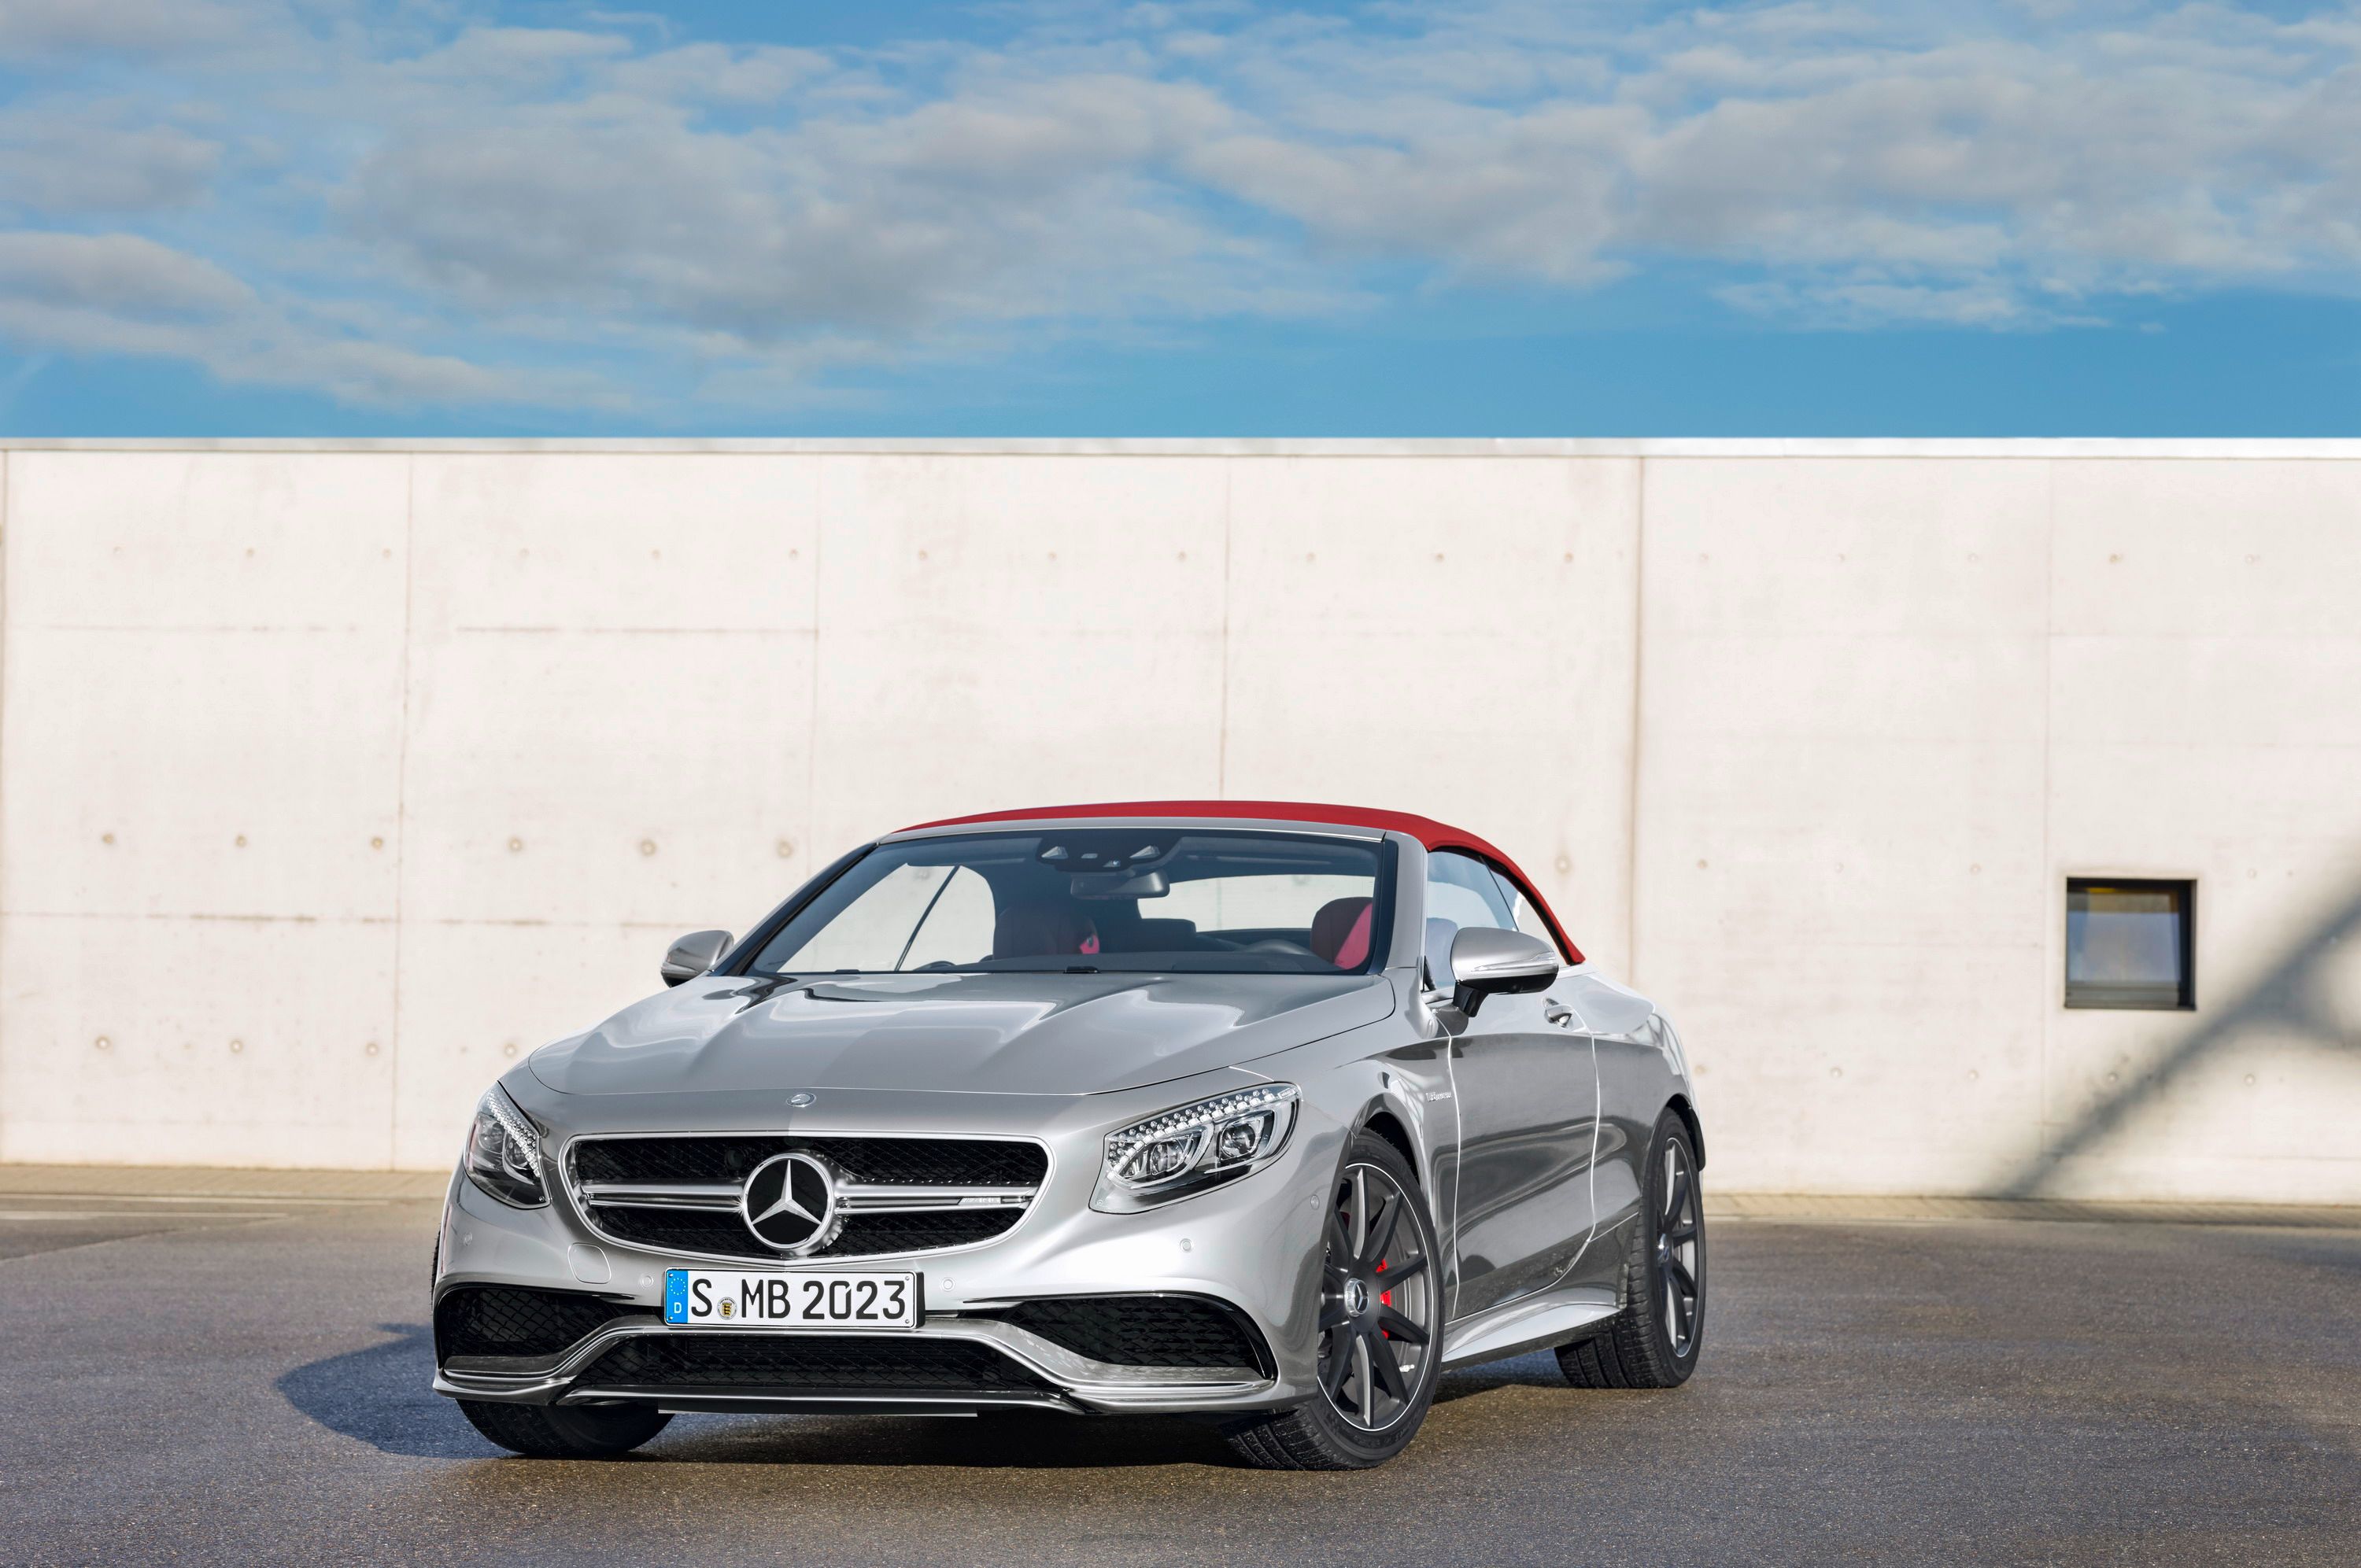 2017 Mercedes-AMG S 63 4MATIC Cabriolet 